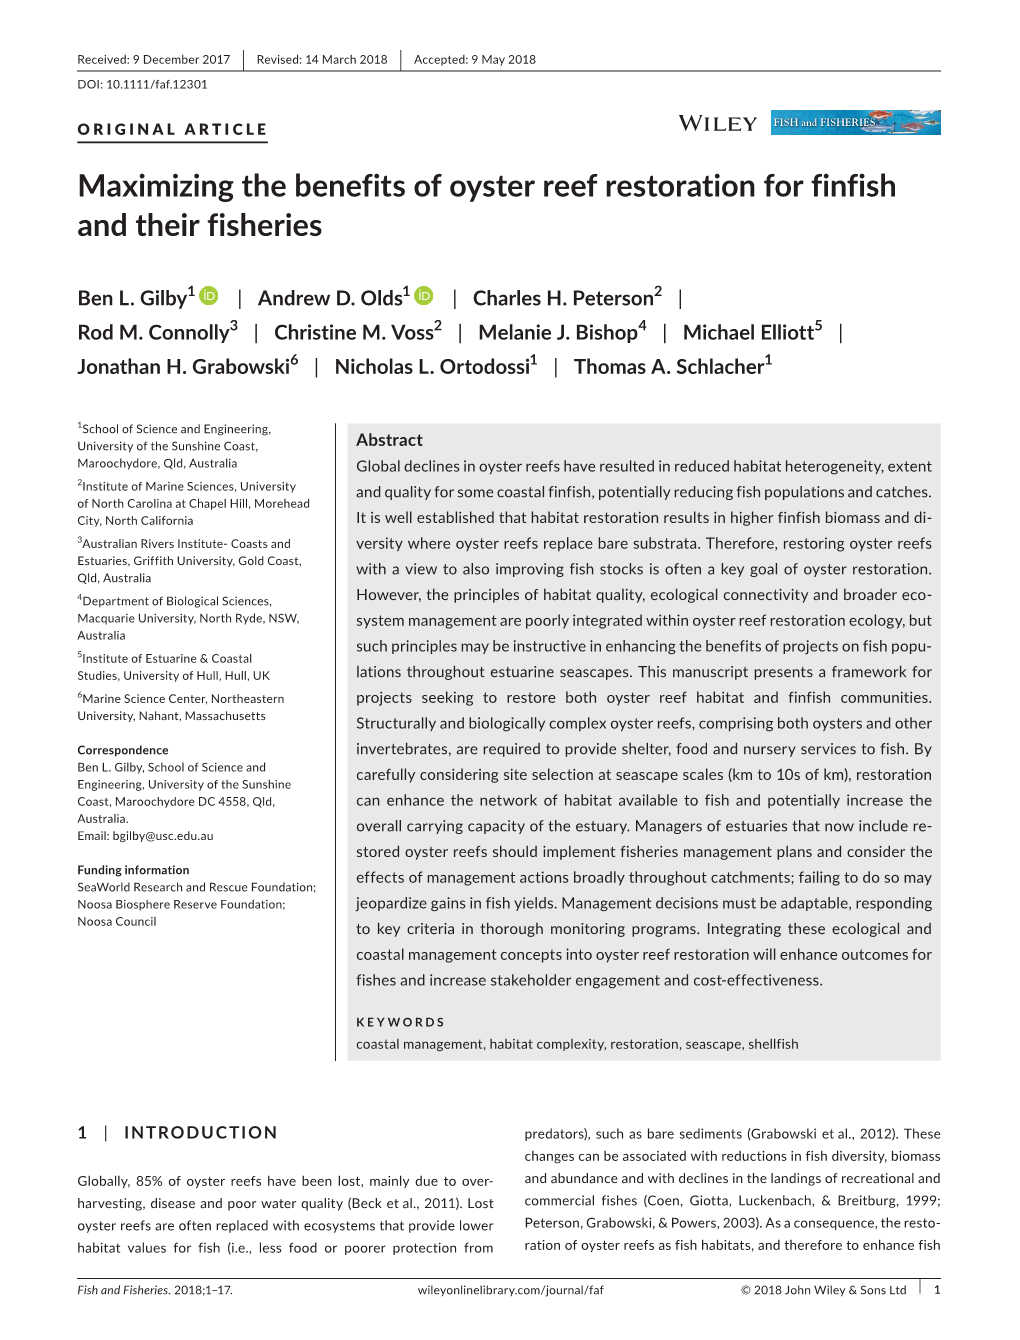 Maximizing the Benefits of Oyster Reef Restoration for Finfish and Their Fisheries